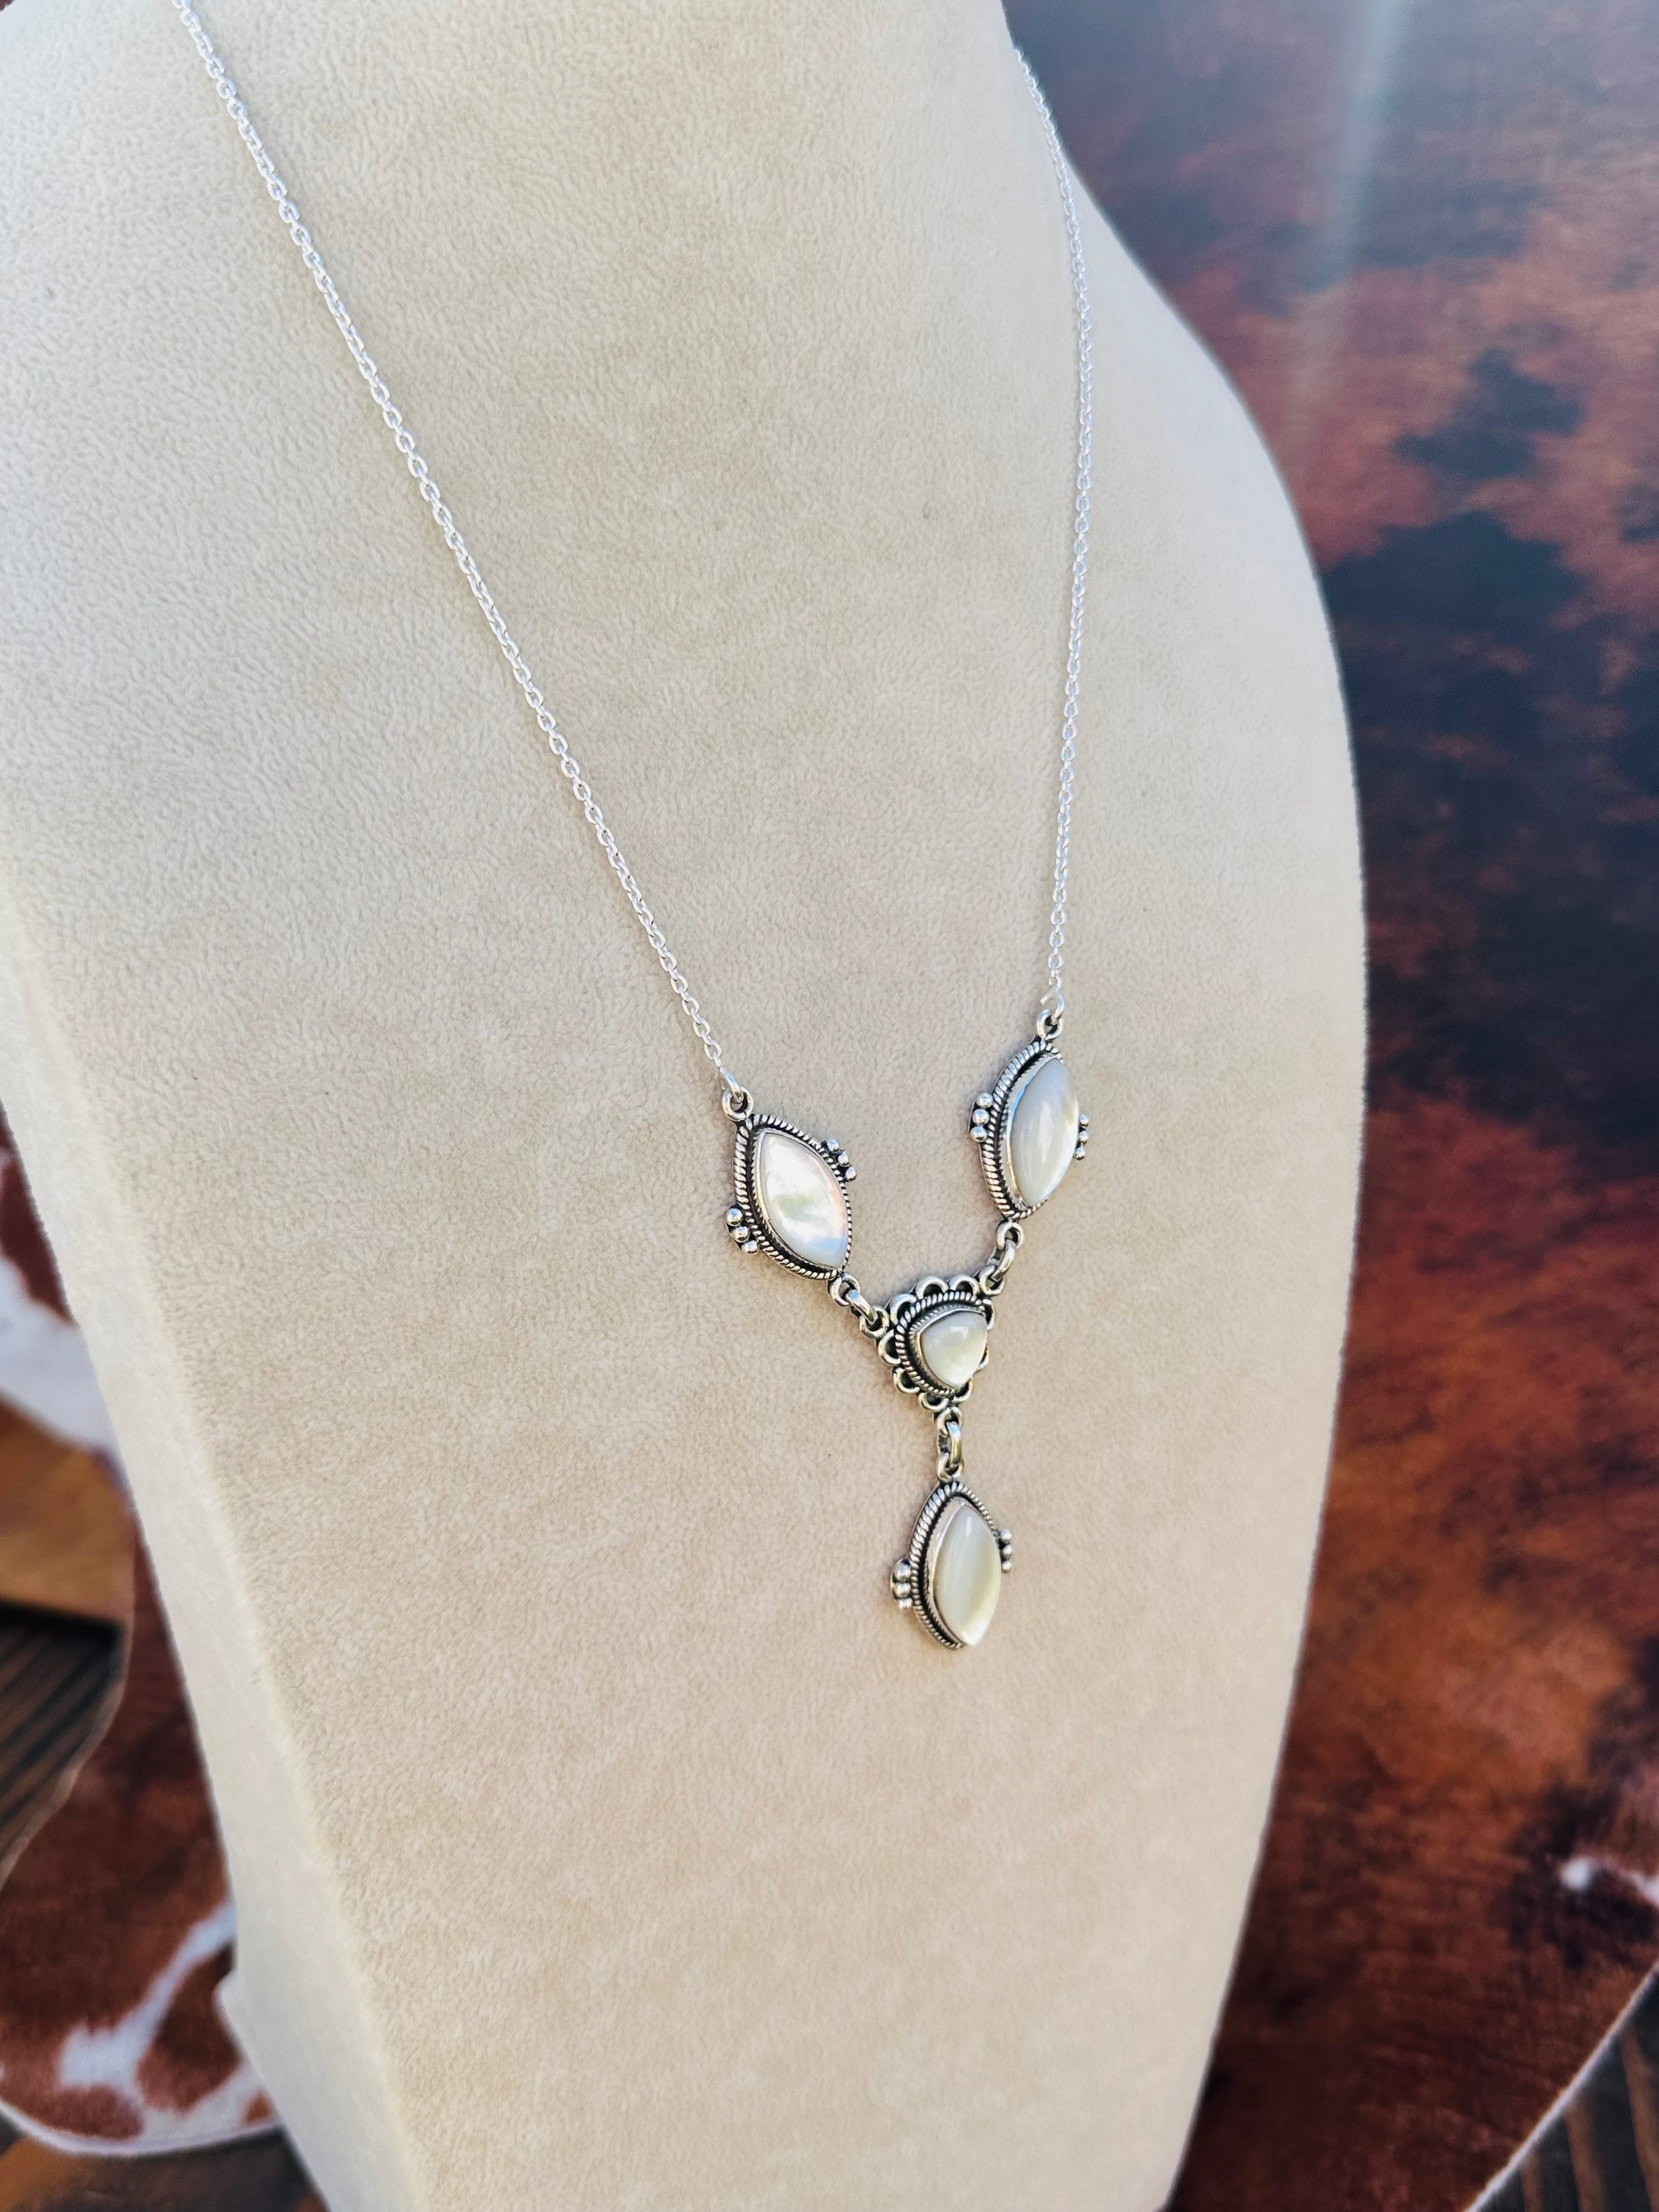 Southwest Handmade Mother of Pearl & Sterling Silver Lariat Necklace